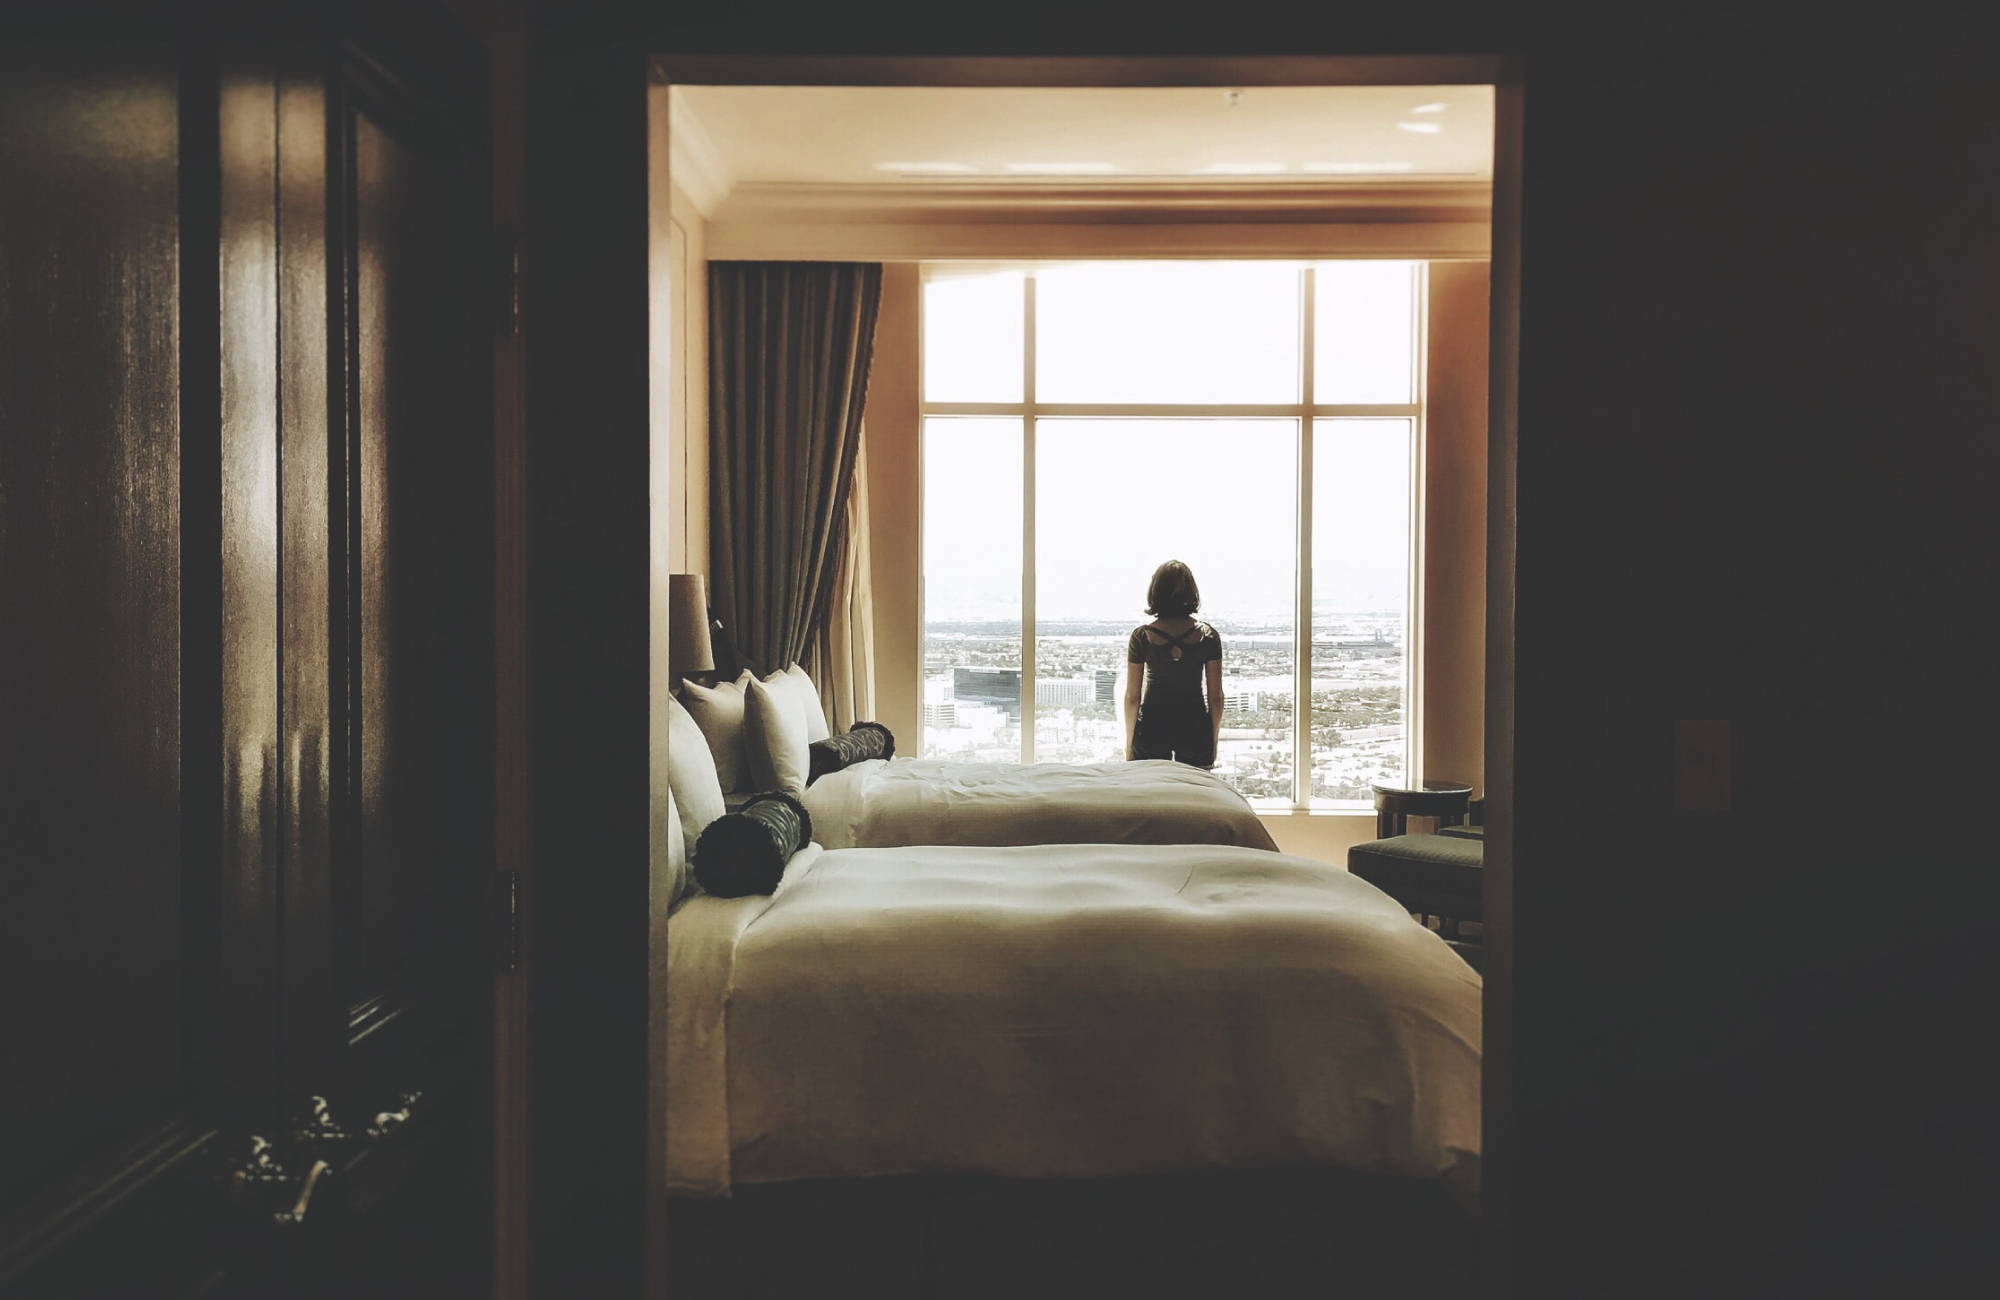 A woman looks out of a Las Vegas hotel room window